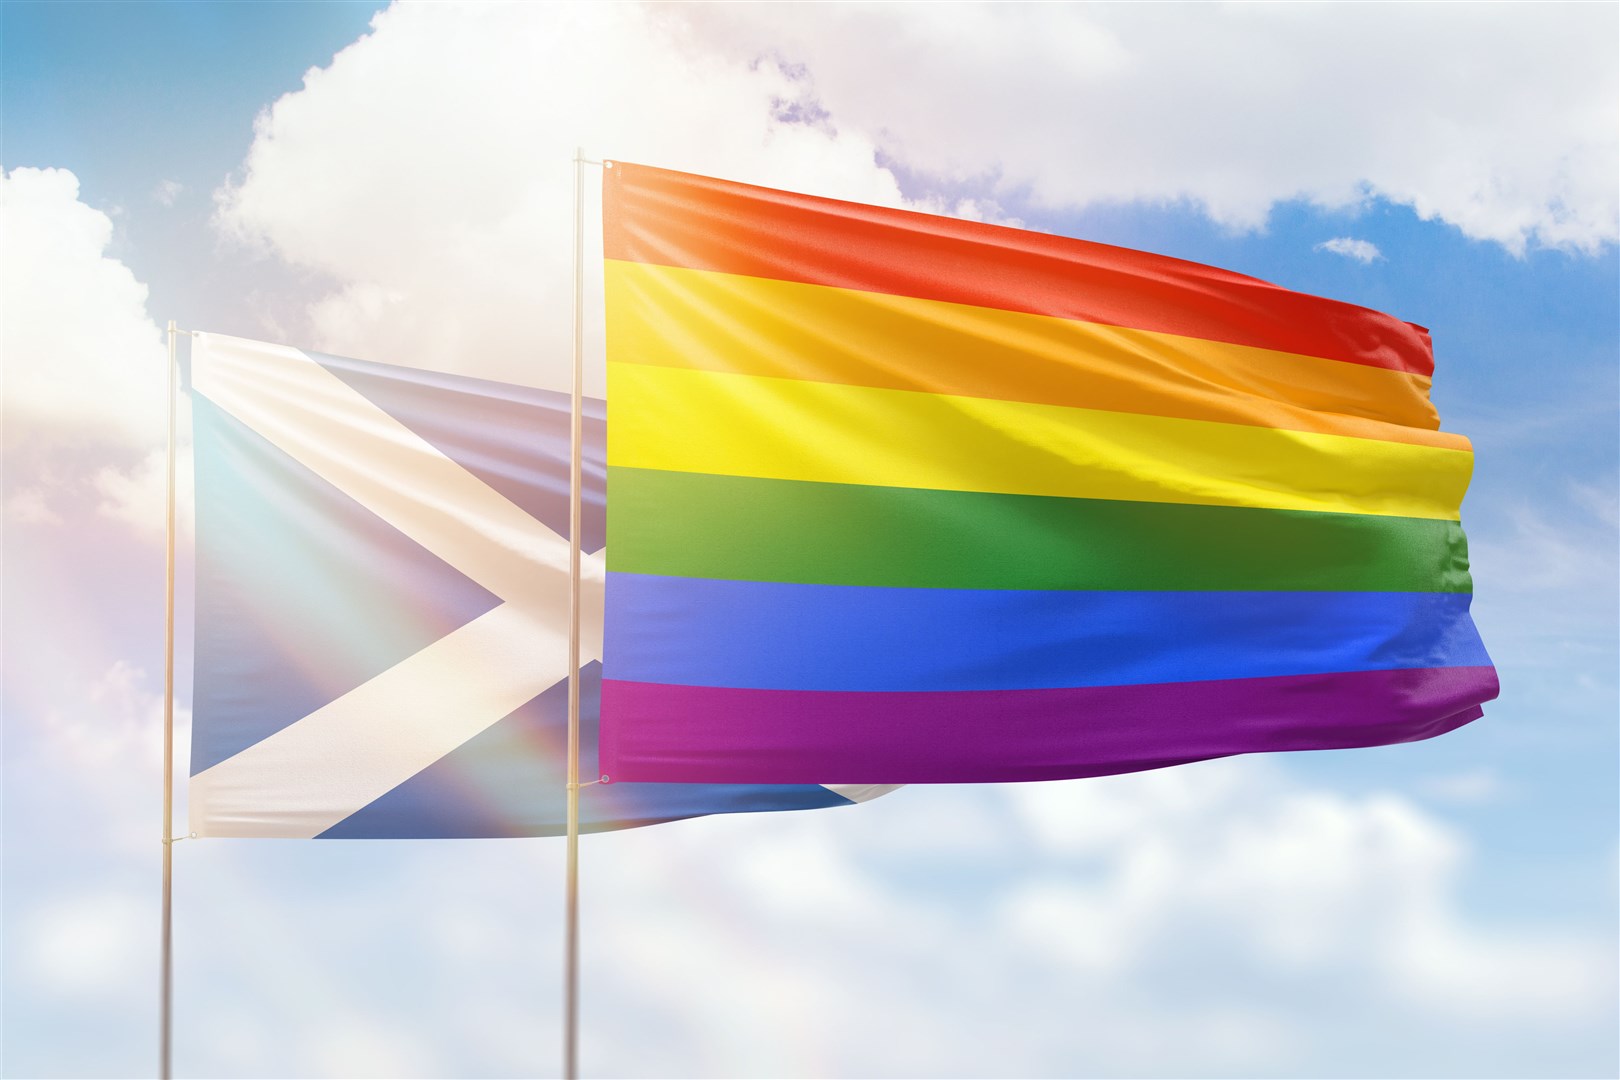 A Pride flag for the LGBT+ community and a Scottish flag side-by-side.